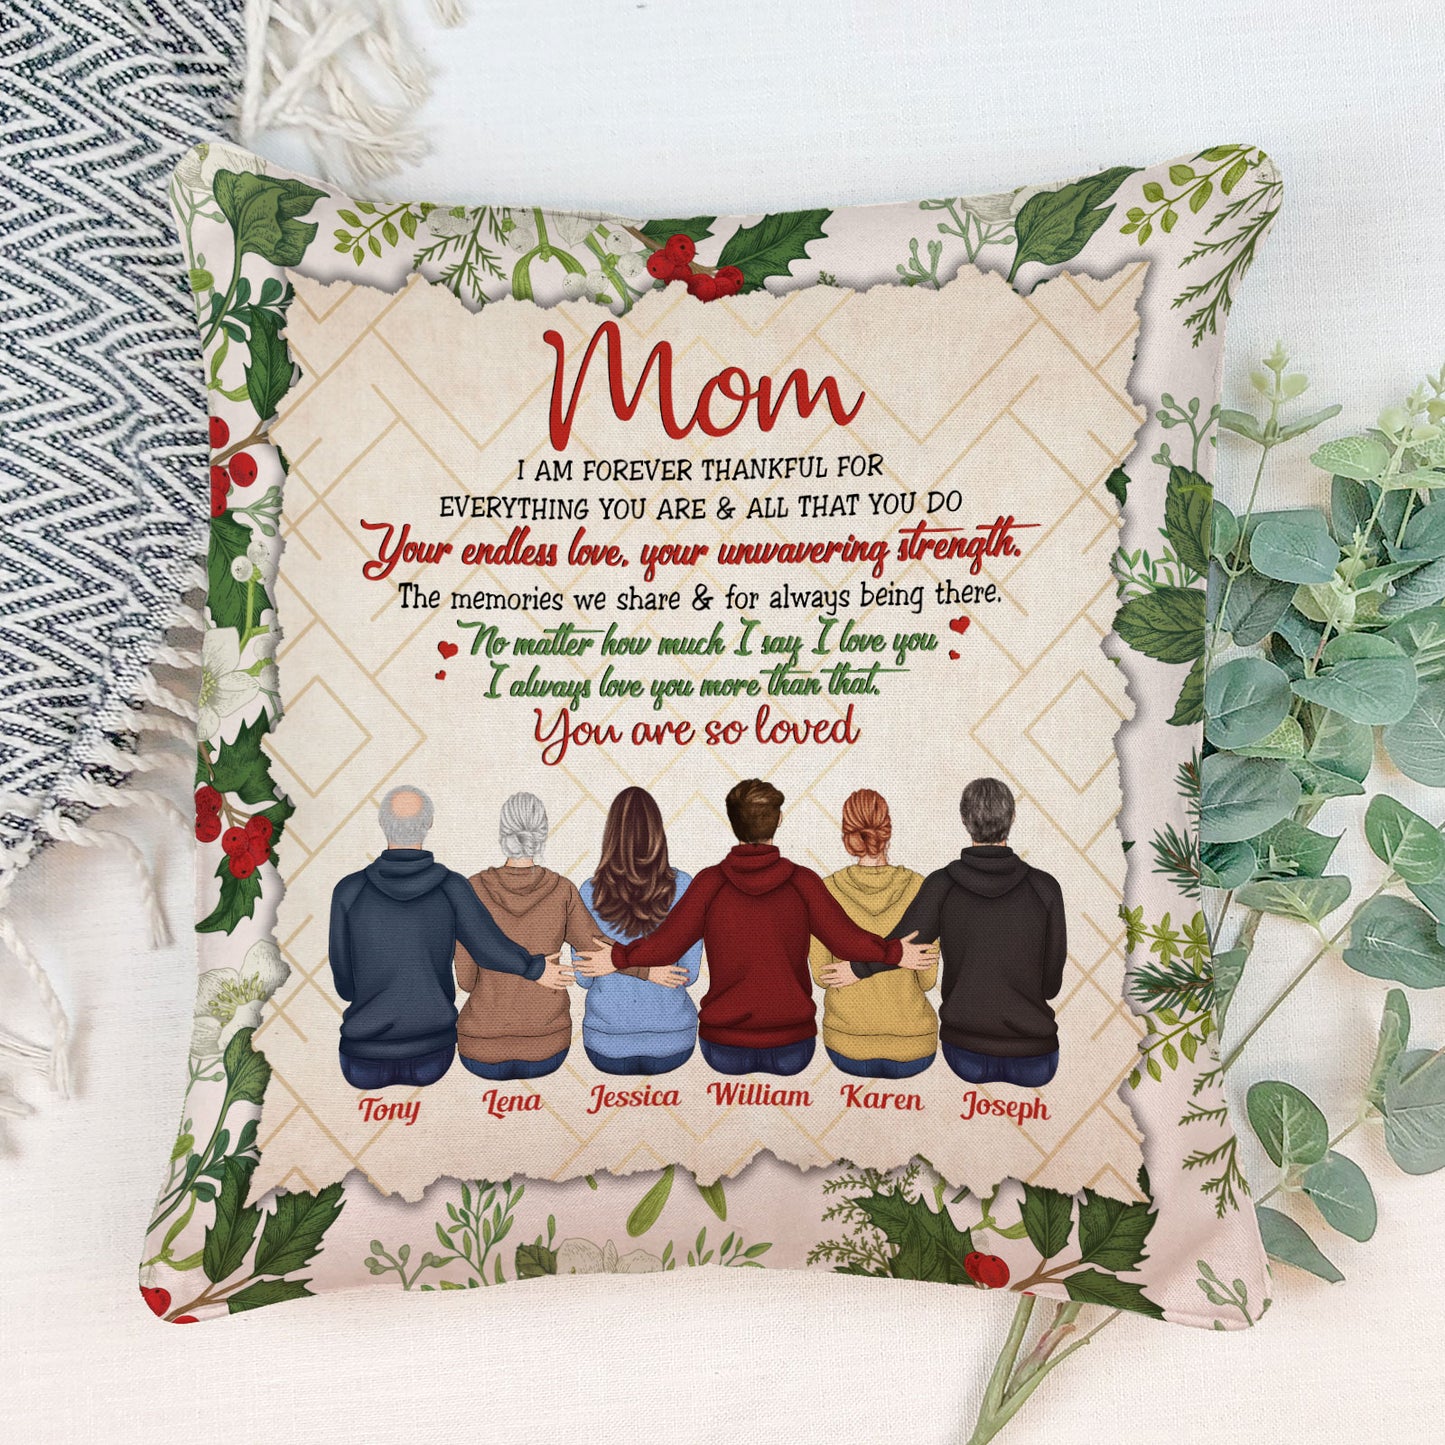 I Love You More Than That - Personalized Pillow - Gift For Mom